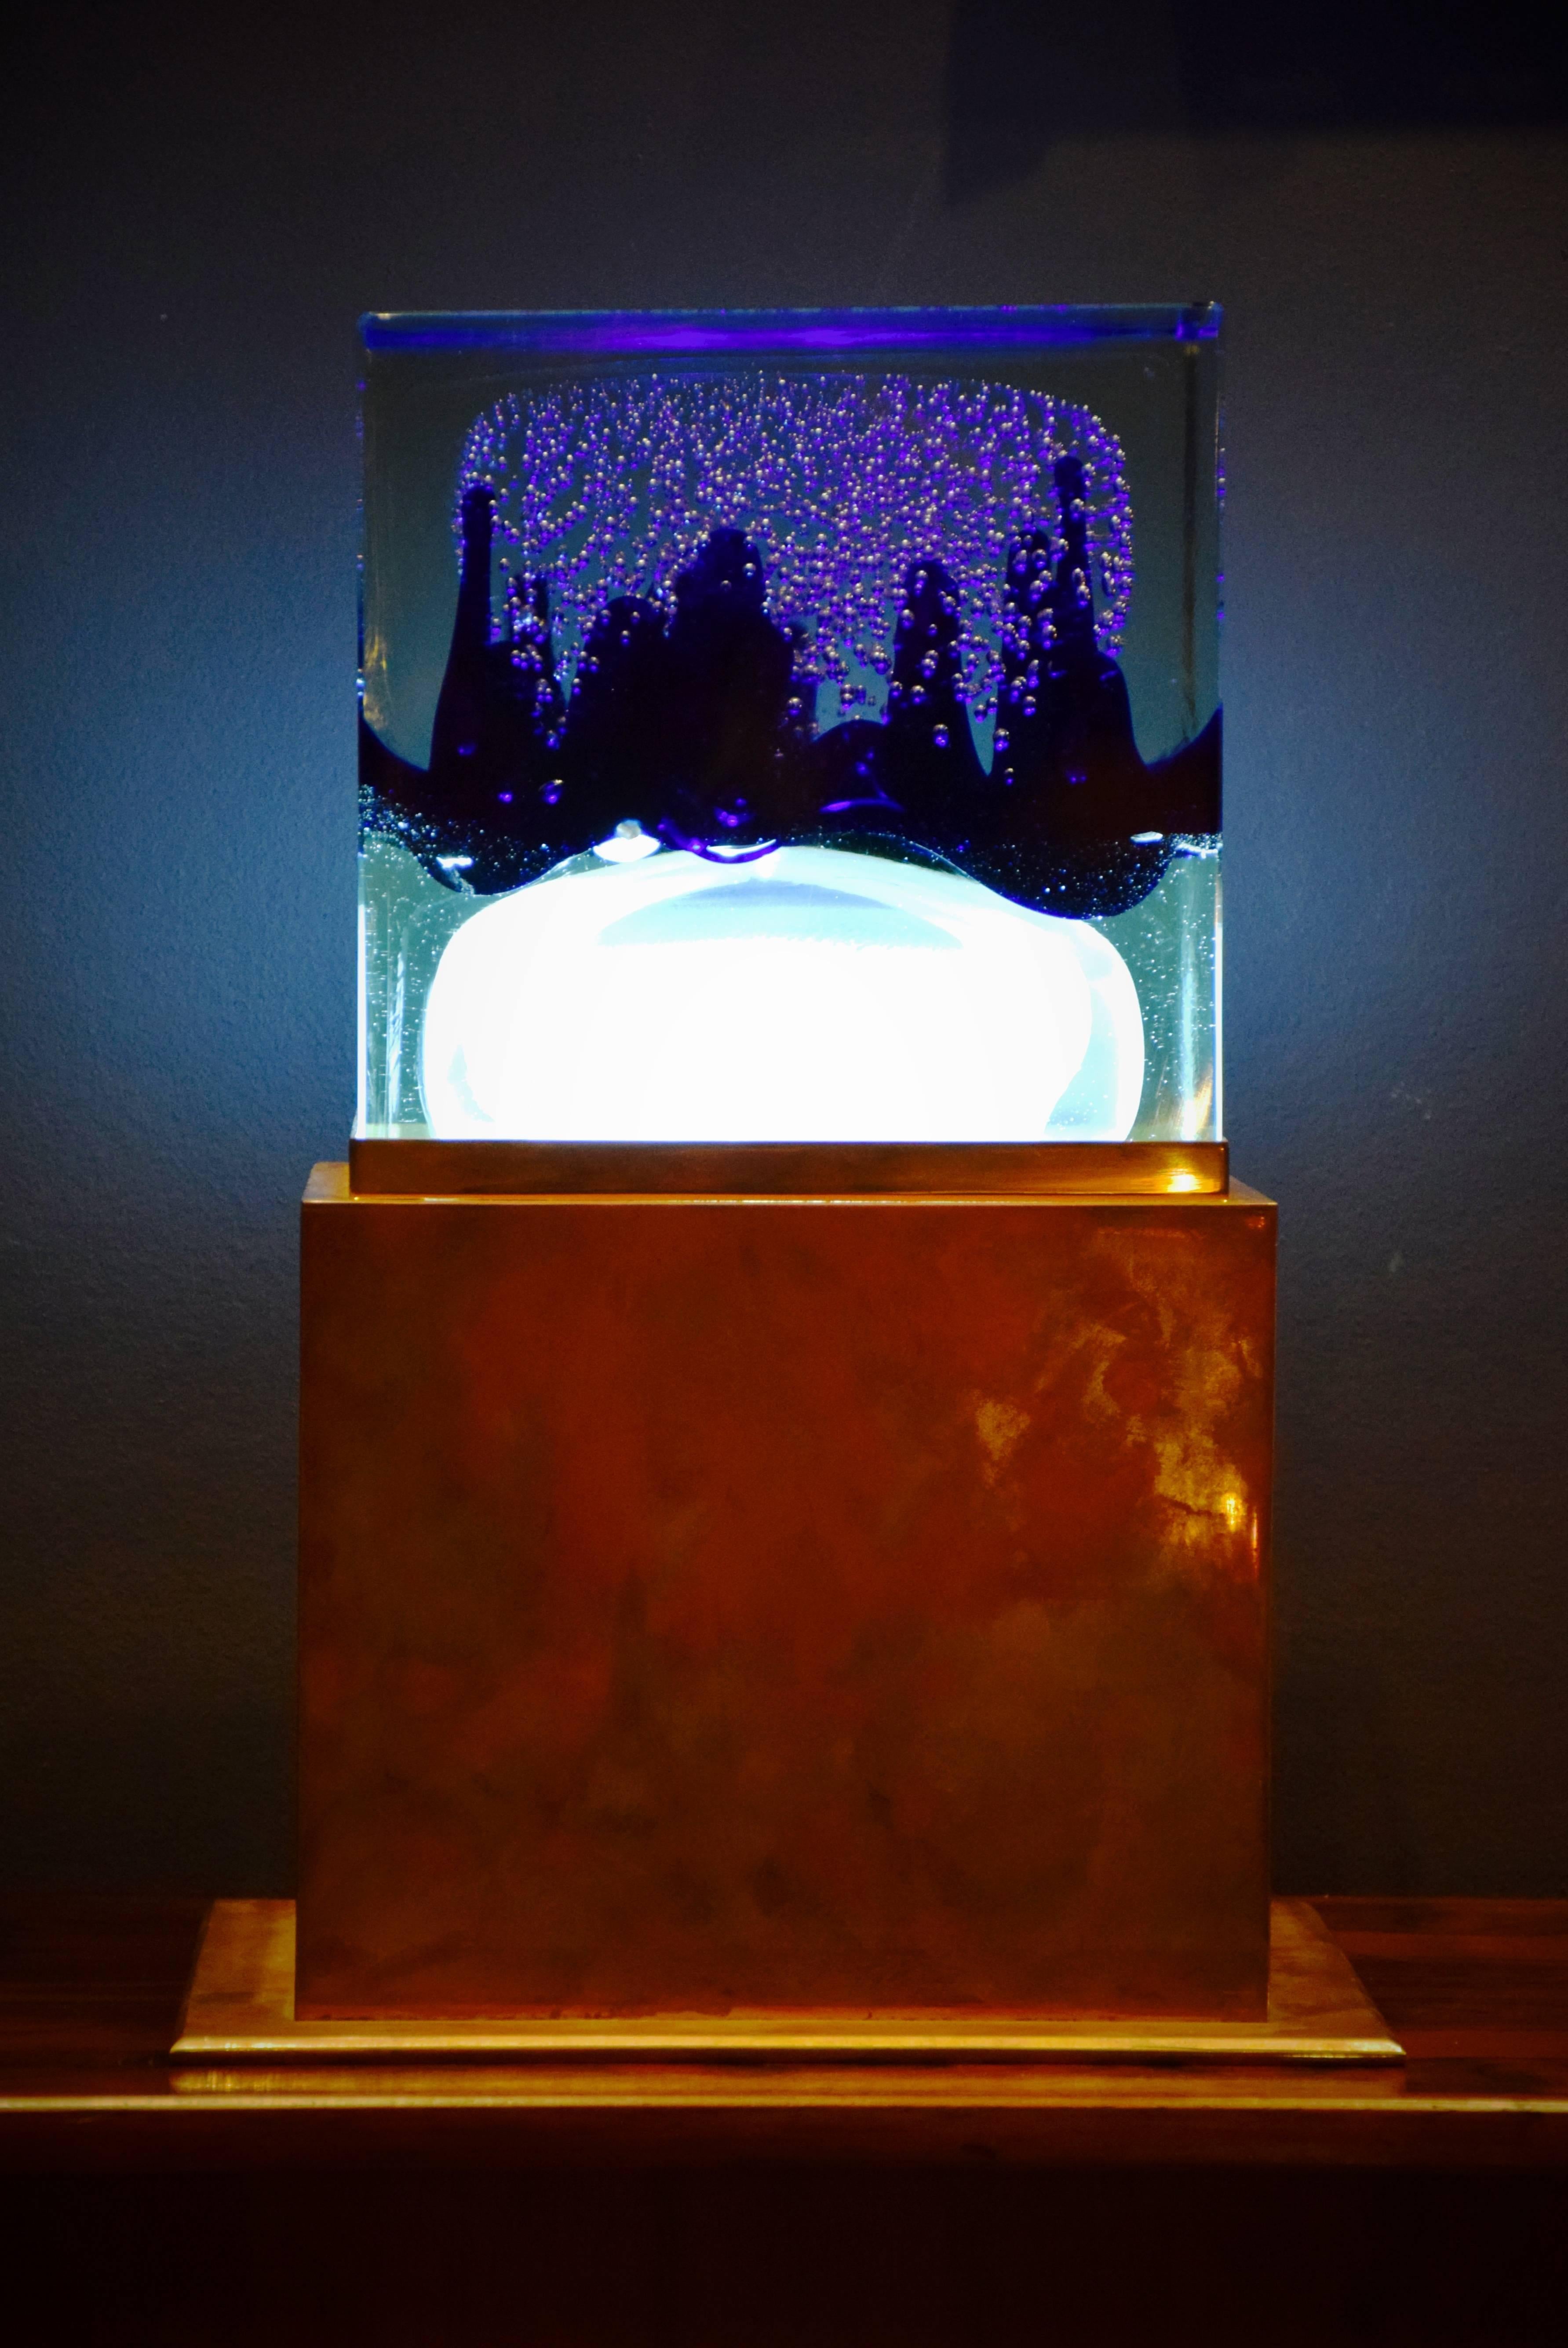 Beautiful and unique table lamp in Murano glass and copper.
The solid glass cube is filled with bubbles, blue glass and white glass in a jellyfish or cloud shape. Underneath the glass cube is a light.
The base is made from 